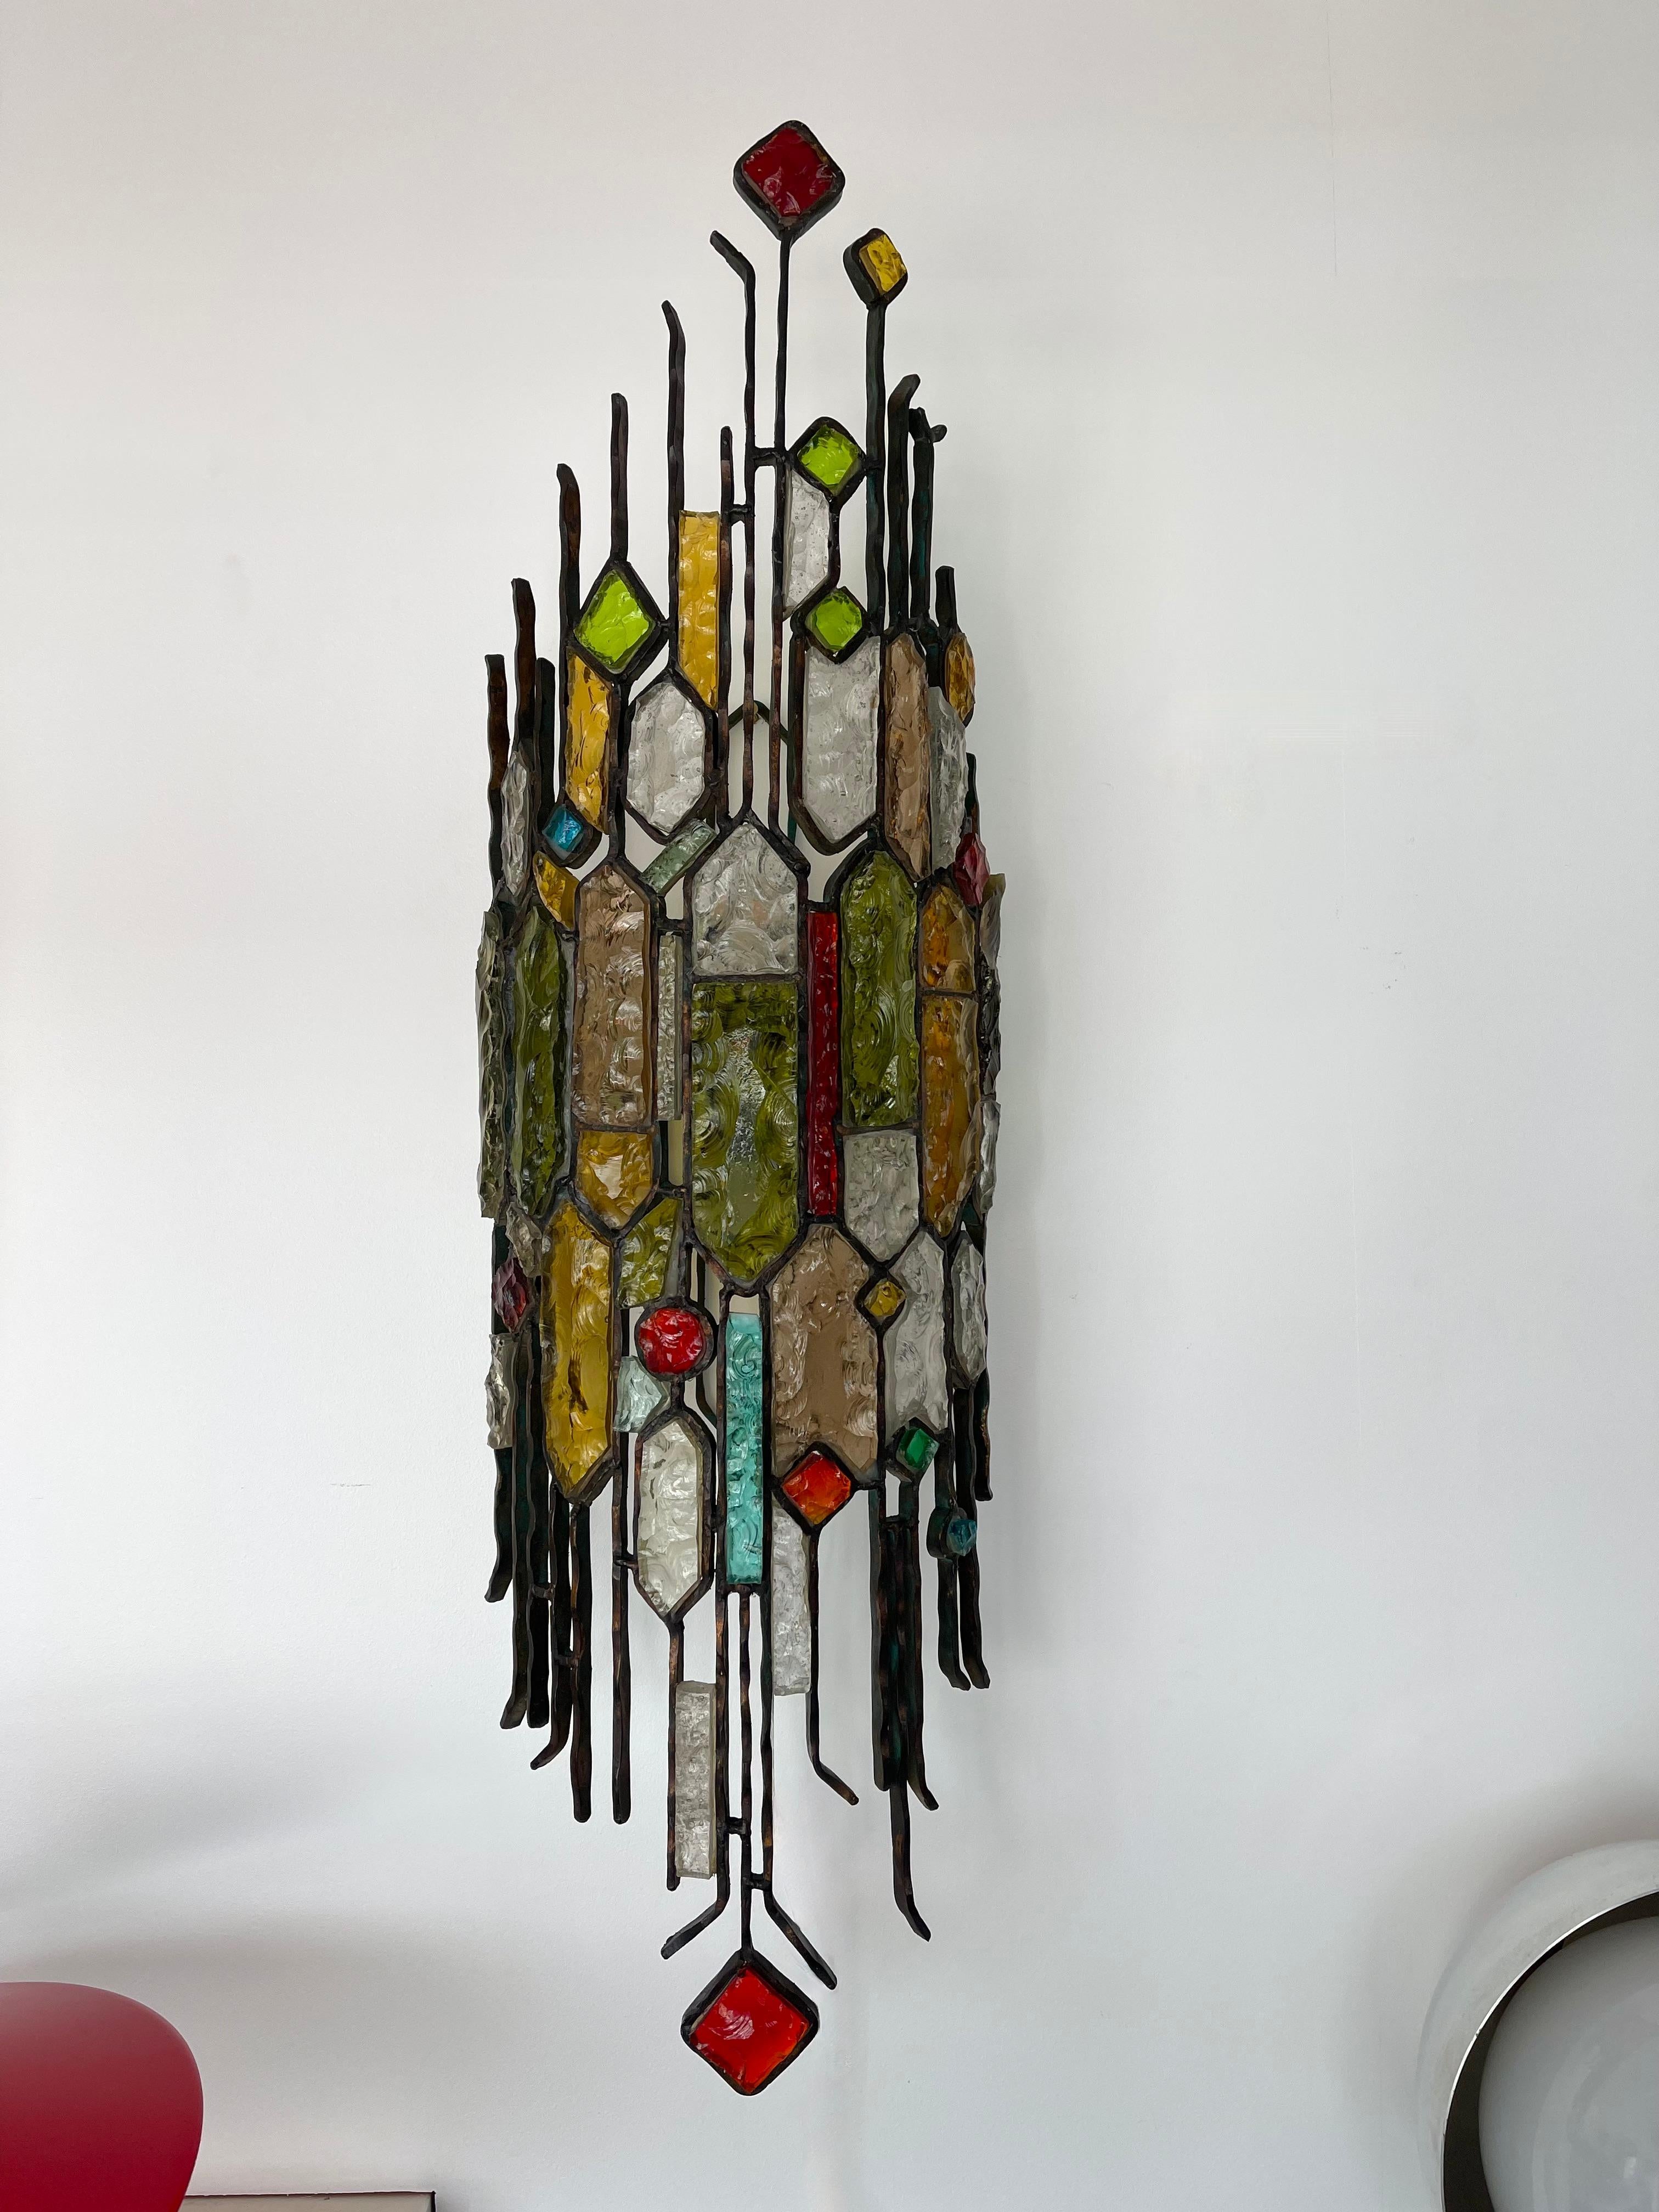 Extra Large wall lamp light sconce multicolor hammered glass and wrought iron, partial gilding gold patina, by the manufacture Longobard in Verona in a Brutalist style, the concurrent of Biancardi Jordan Arte and Poliarte during the 1970s. Famous